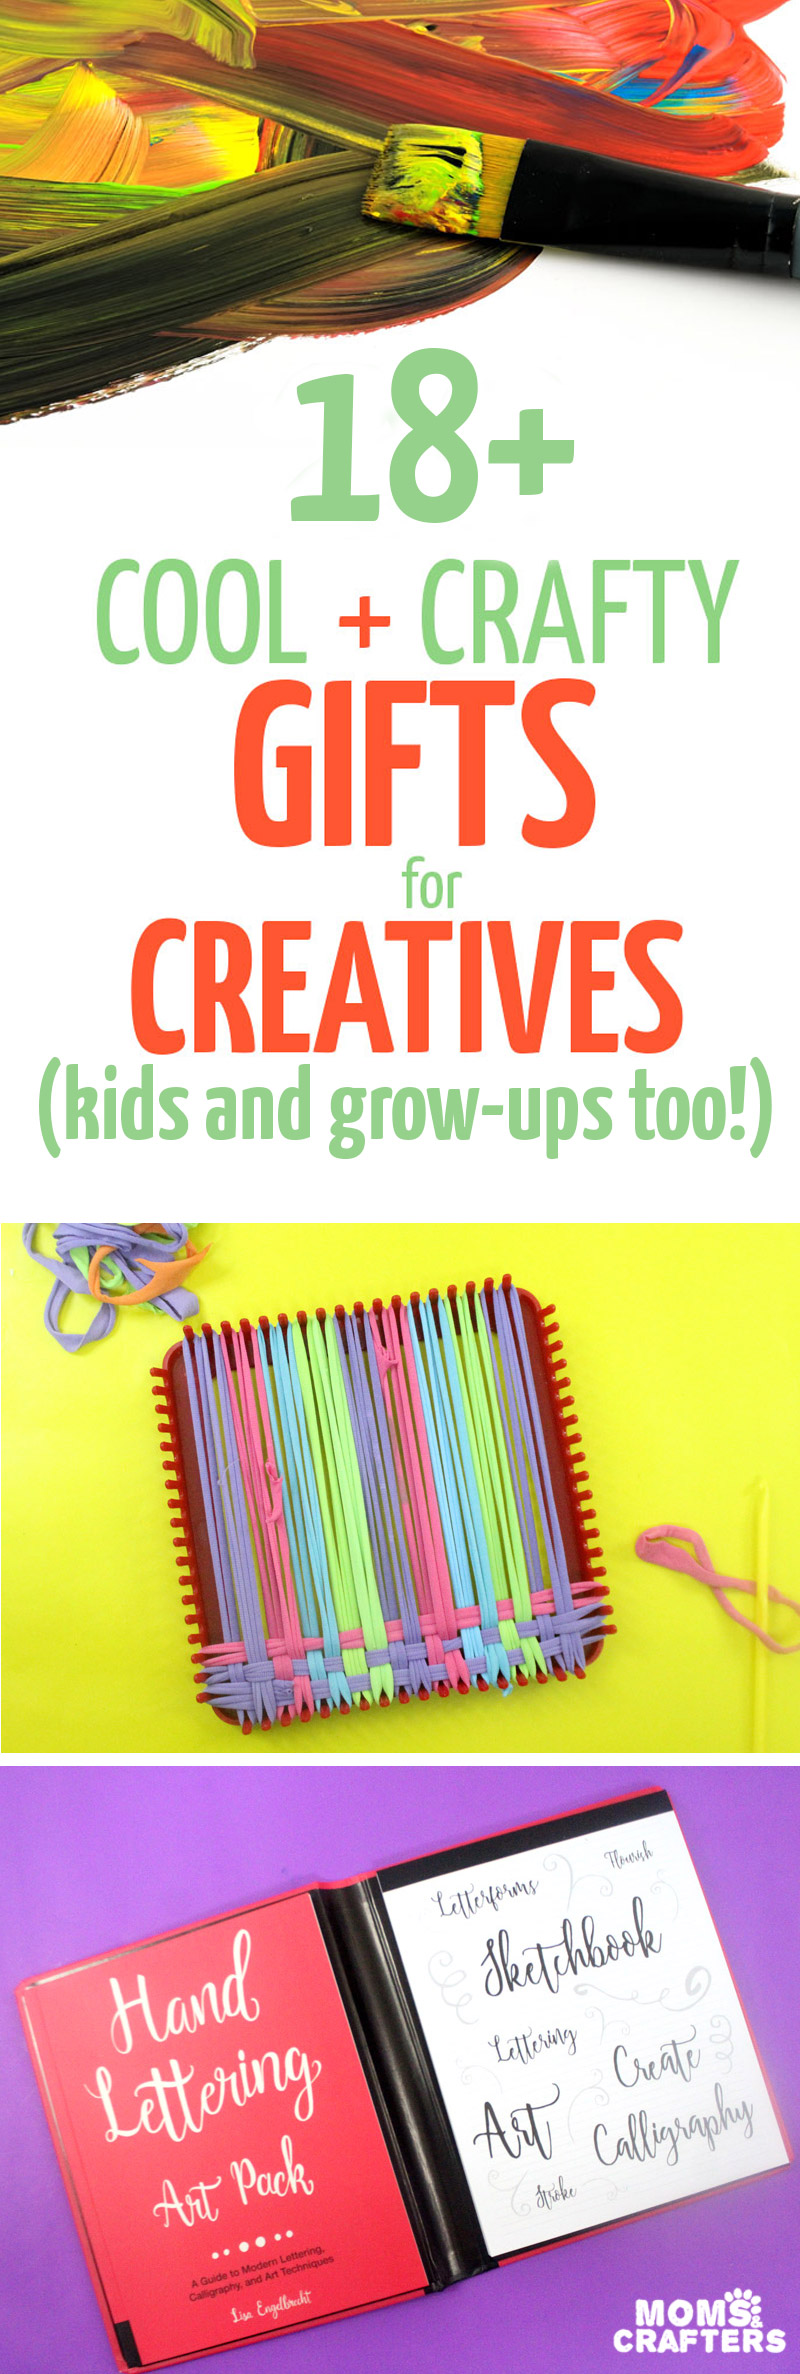 These cool gifts for creatives are perfect for the creative adults, kids, and teens in your life! #christmas #birthdaygift #giftideas